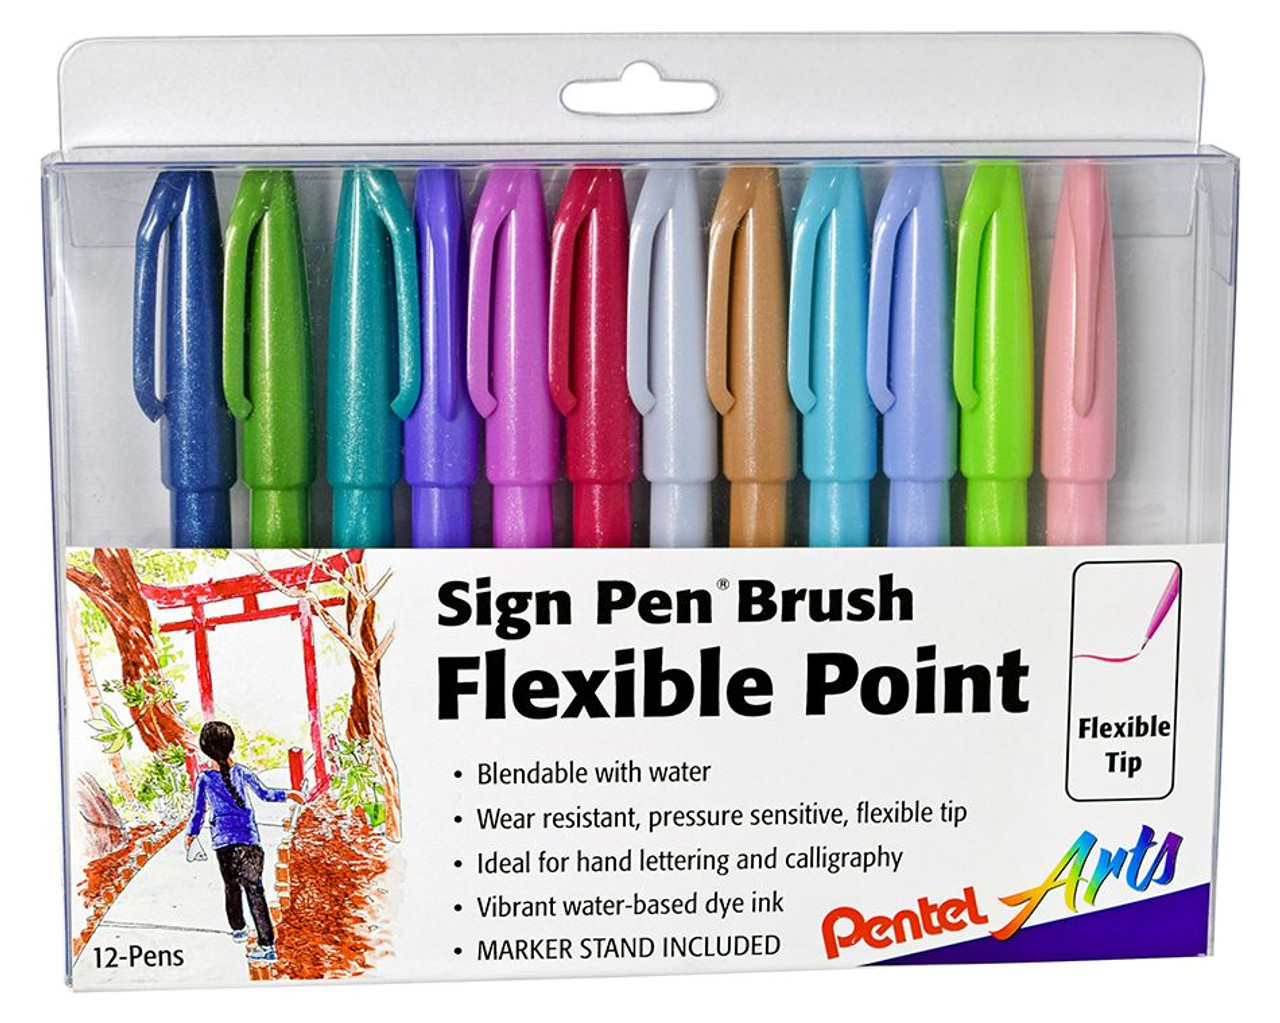 Pentel Arts Sign Pens with Brush Tip 12/Pkg Assorted Colors